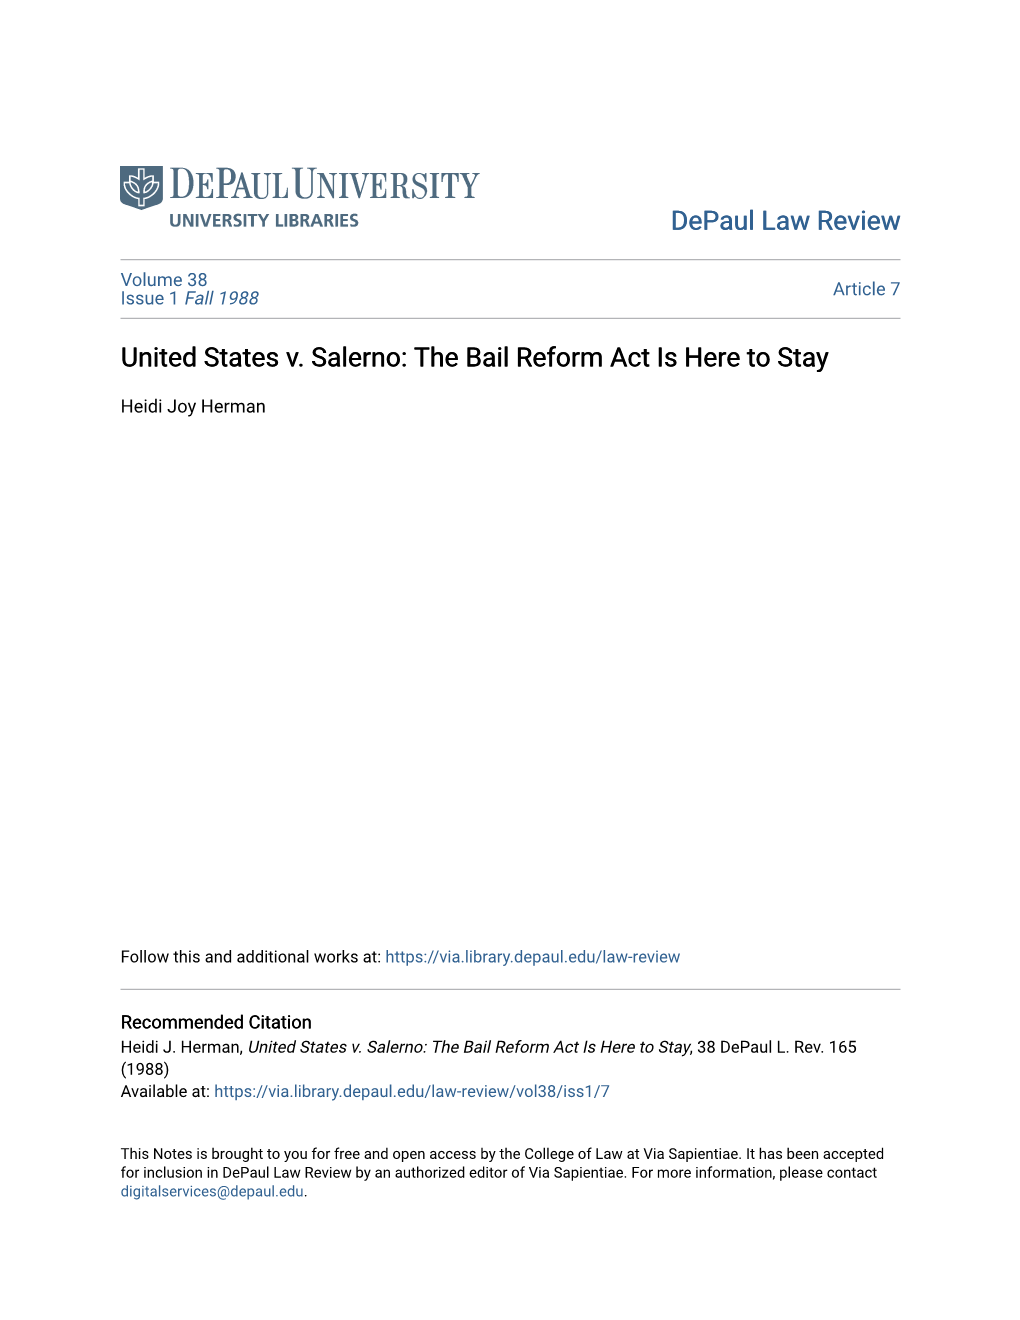 United States V. Salerno: the Bail Reform Act Is Here to Stay